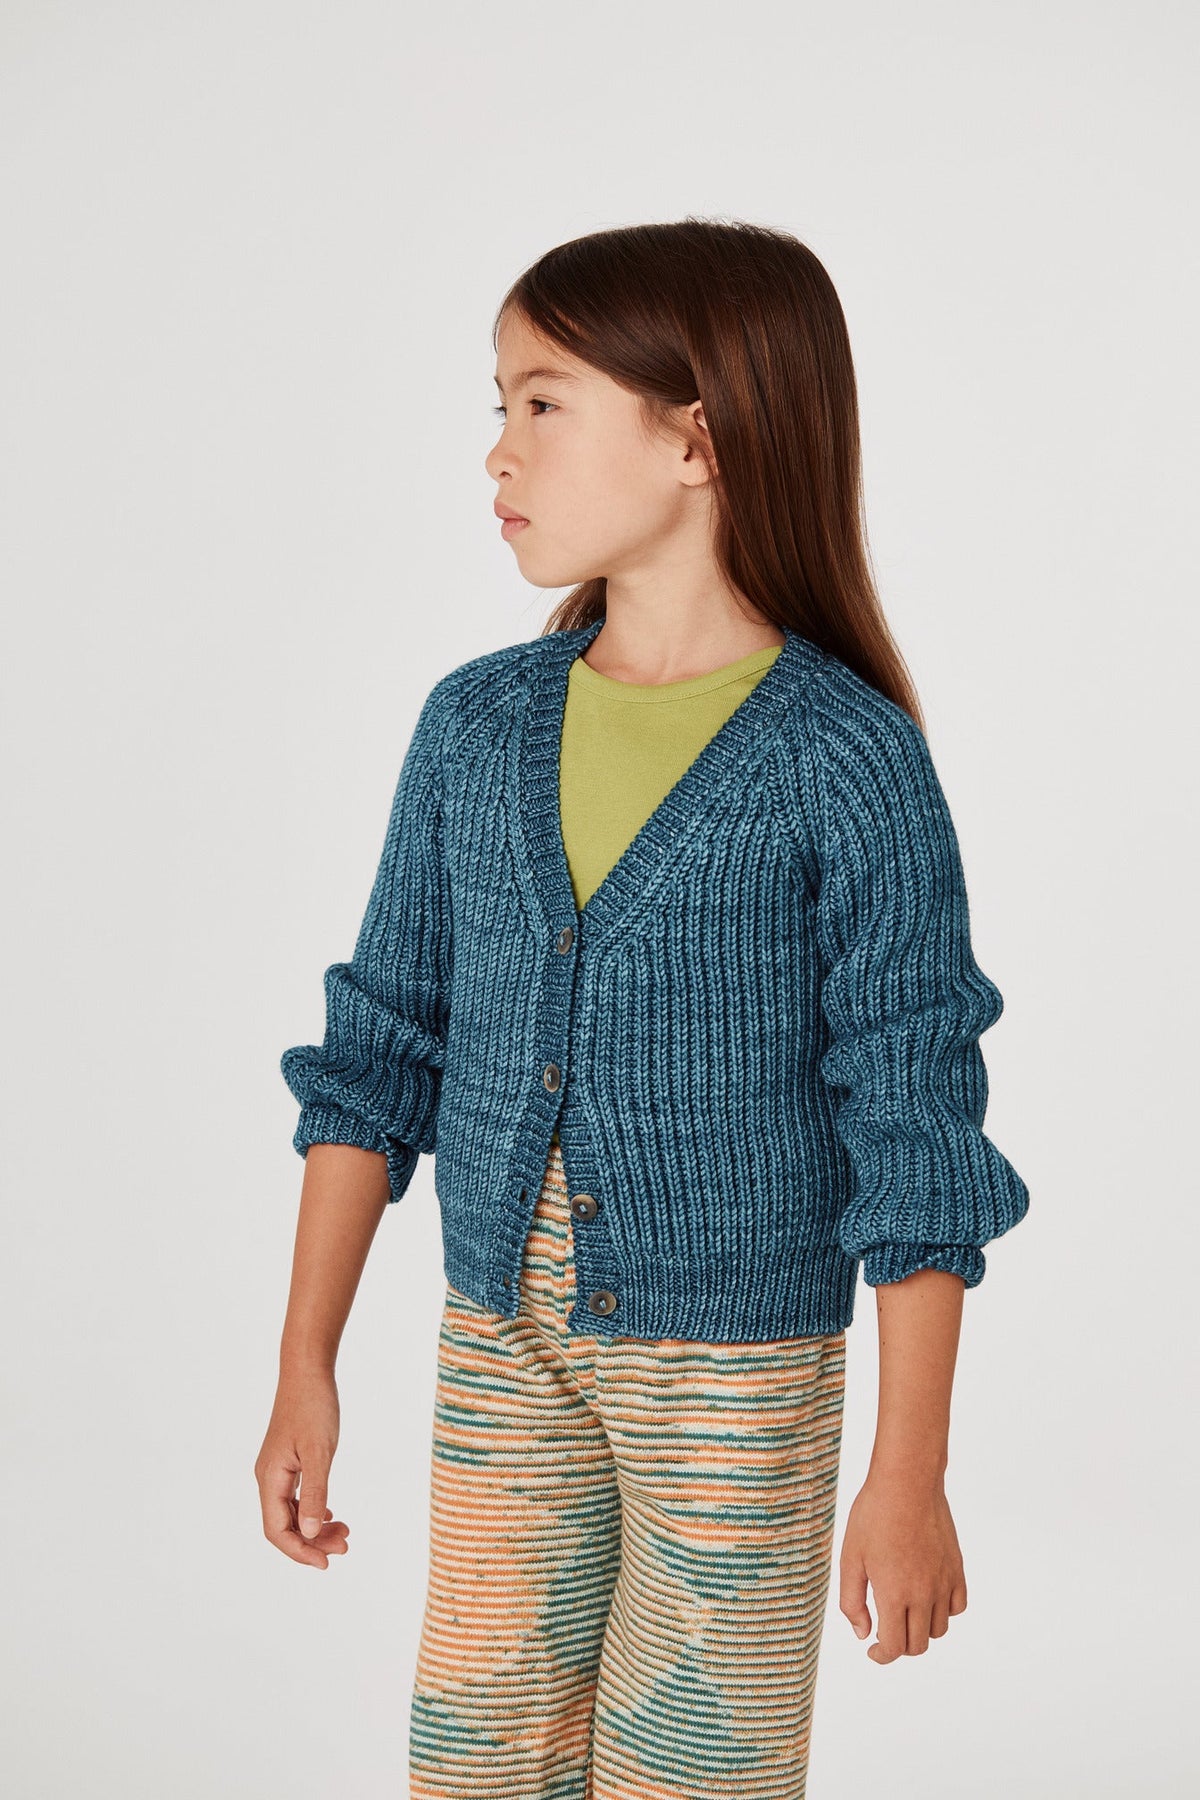 Fisherman Rib Everyday Cardigan - Dusk+Model is 48 inches tall, 47lbs, wearing a size 4-5y